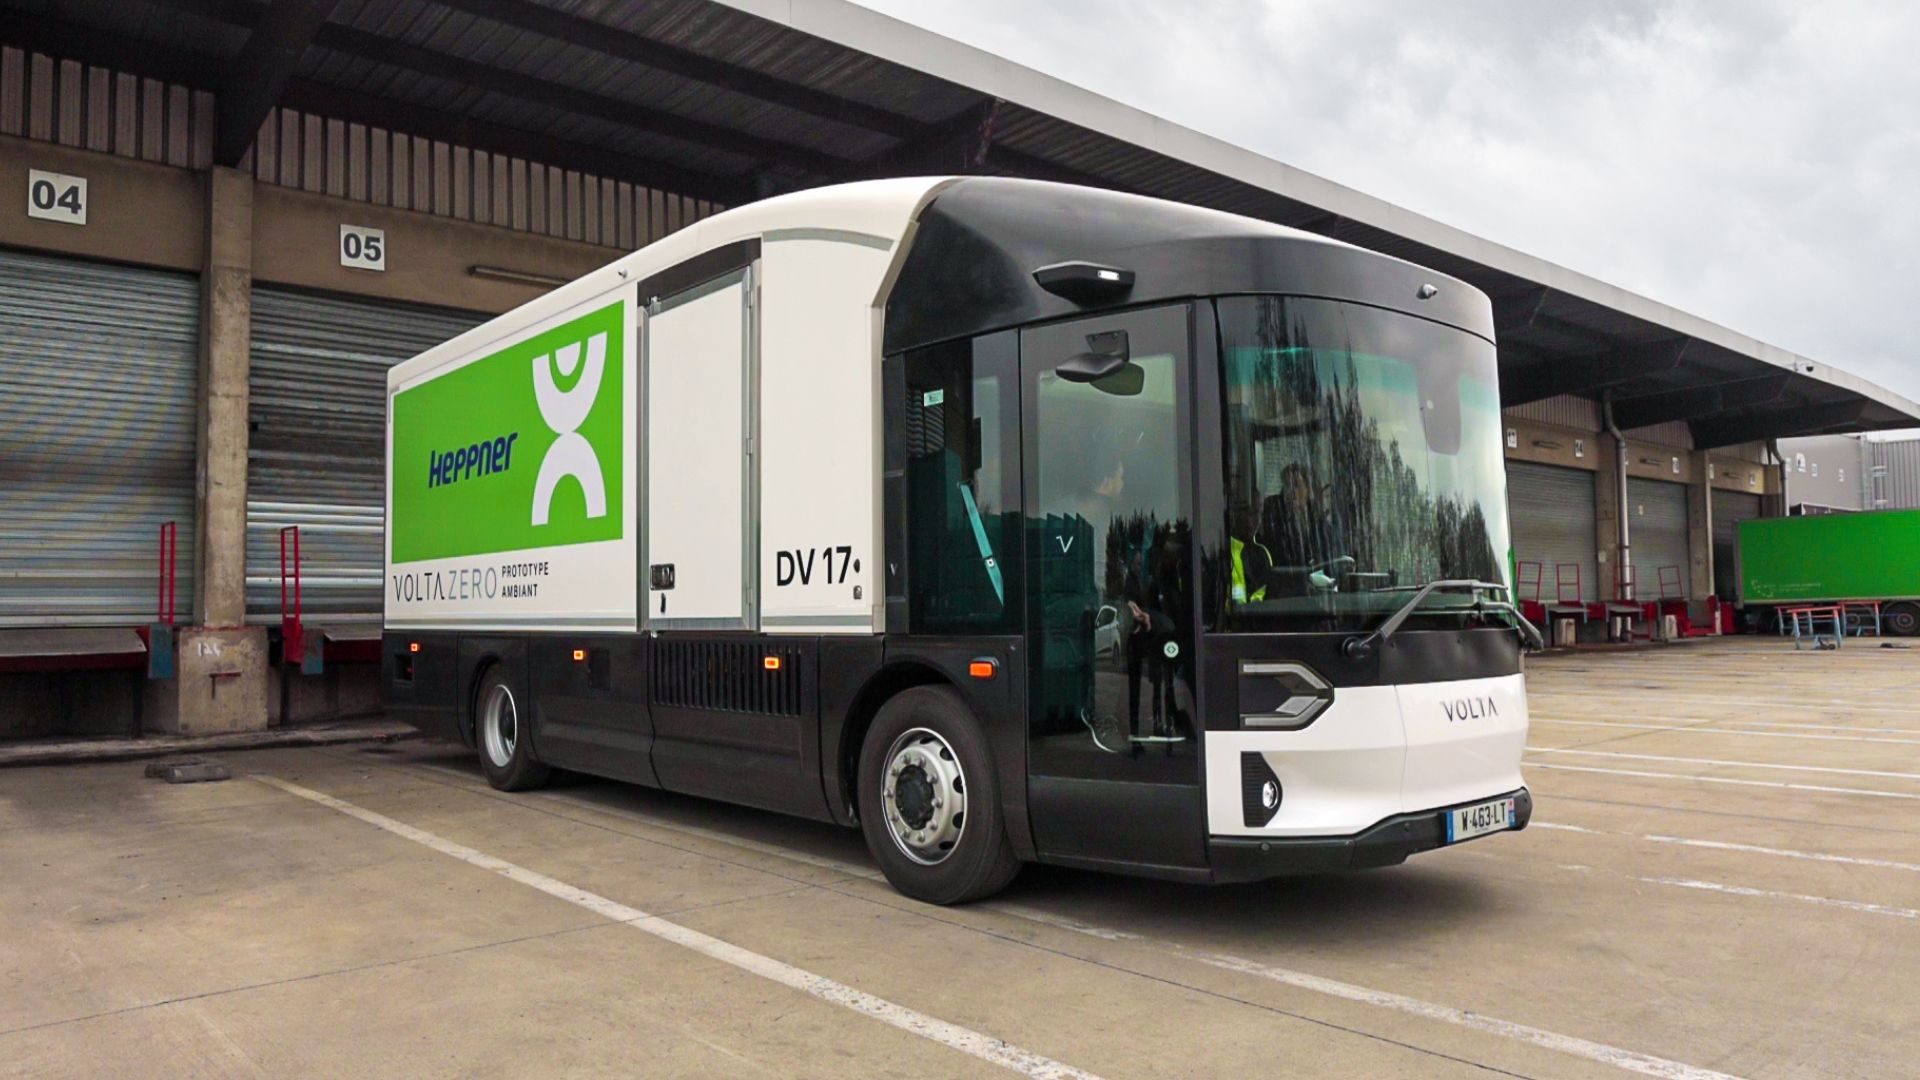 Volta Trucks announces first implementation of its new full−electric Volta Zero with Truck as a Service charging infrastructure to Heppner